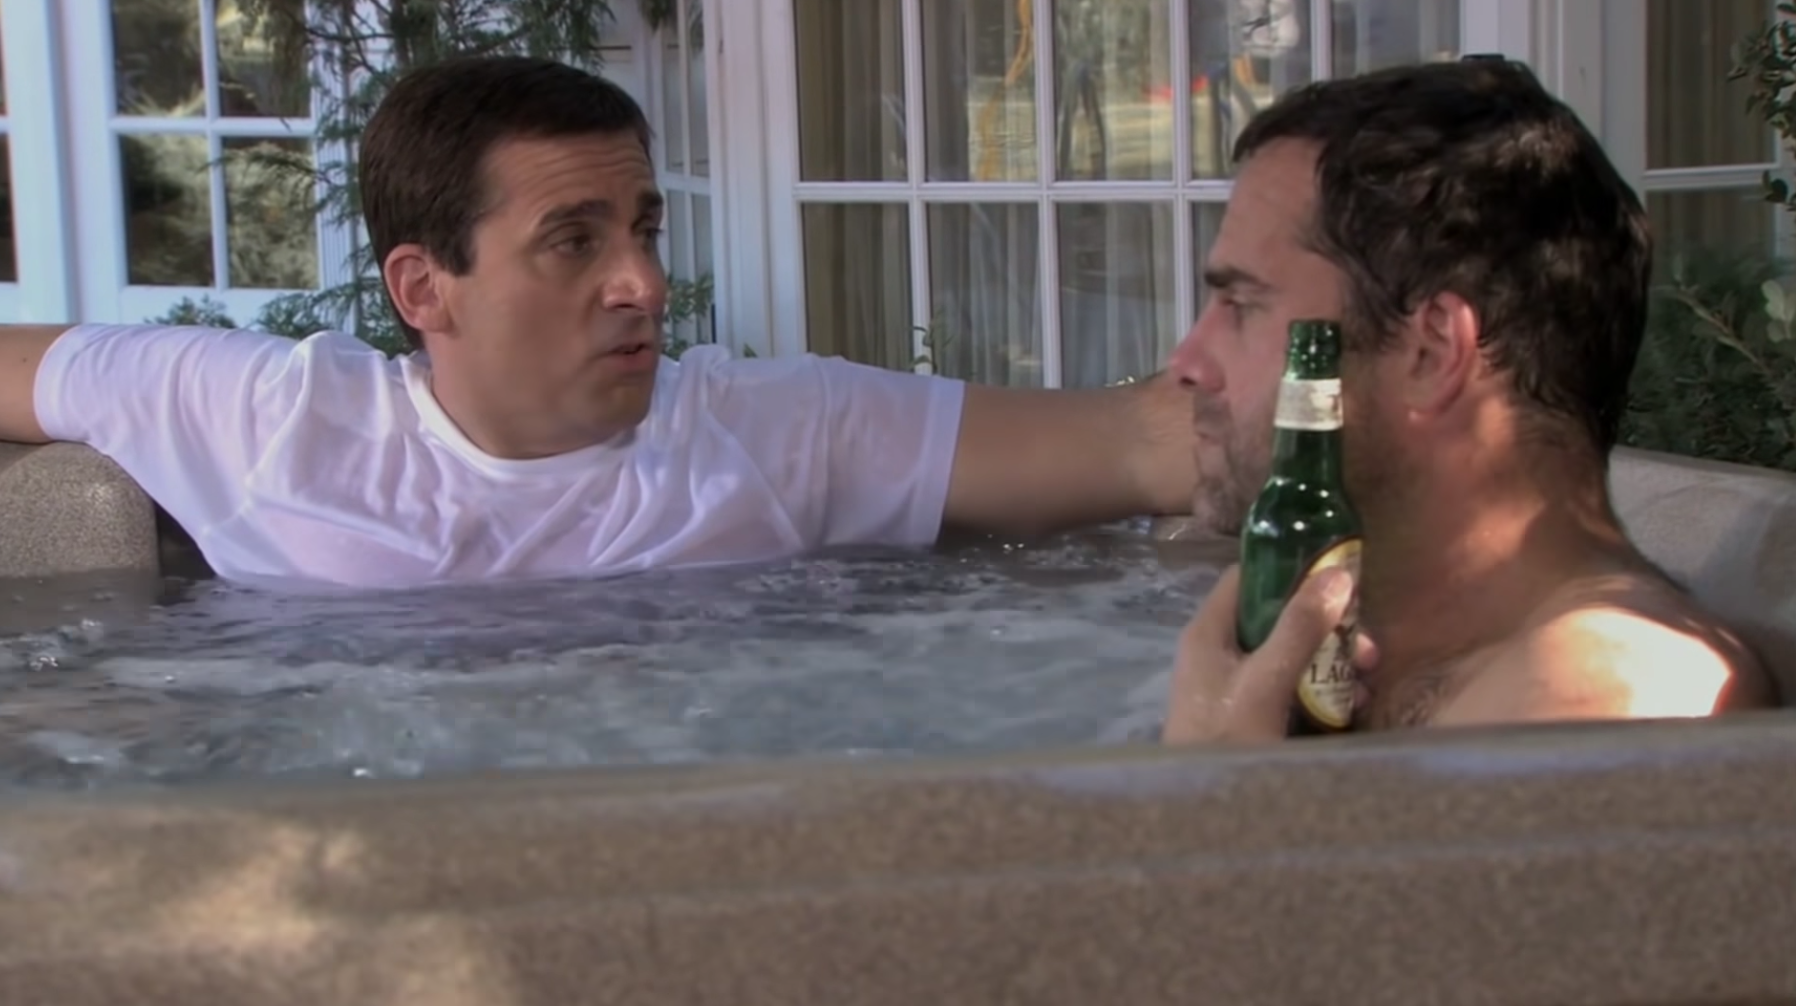 Michael in a hot tub while wearing a shirt